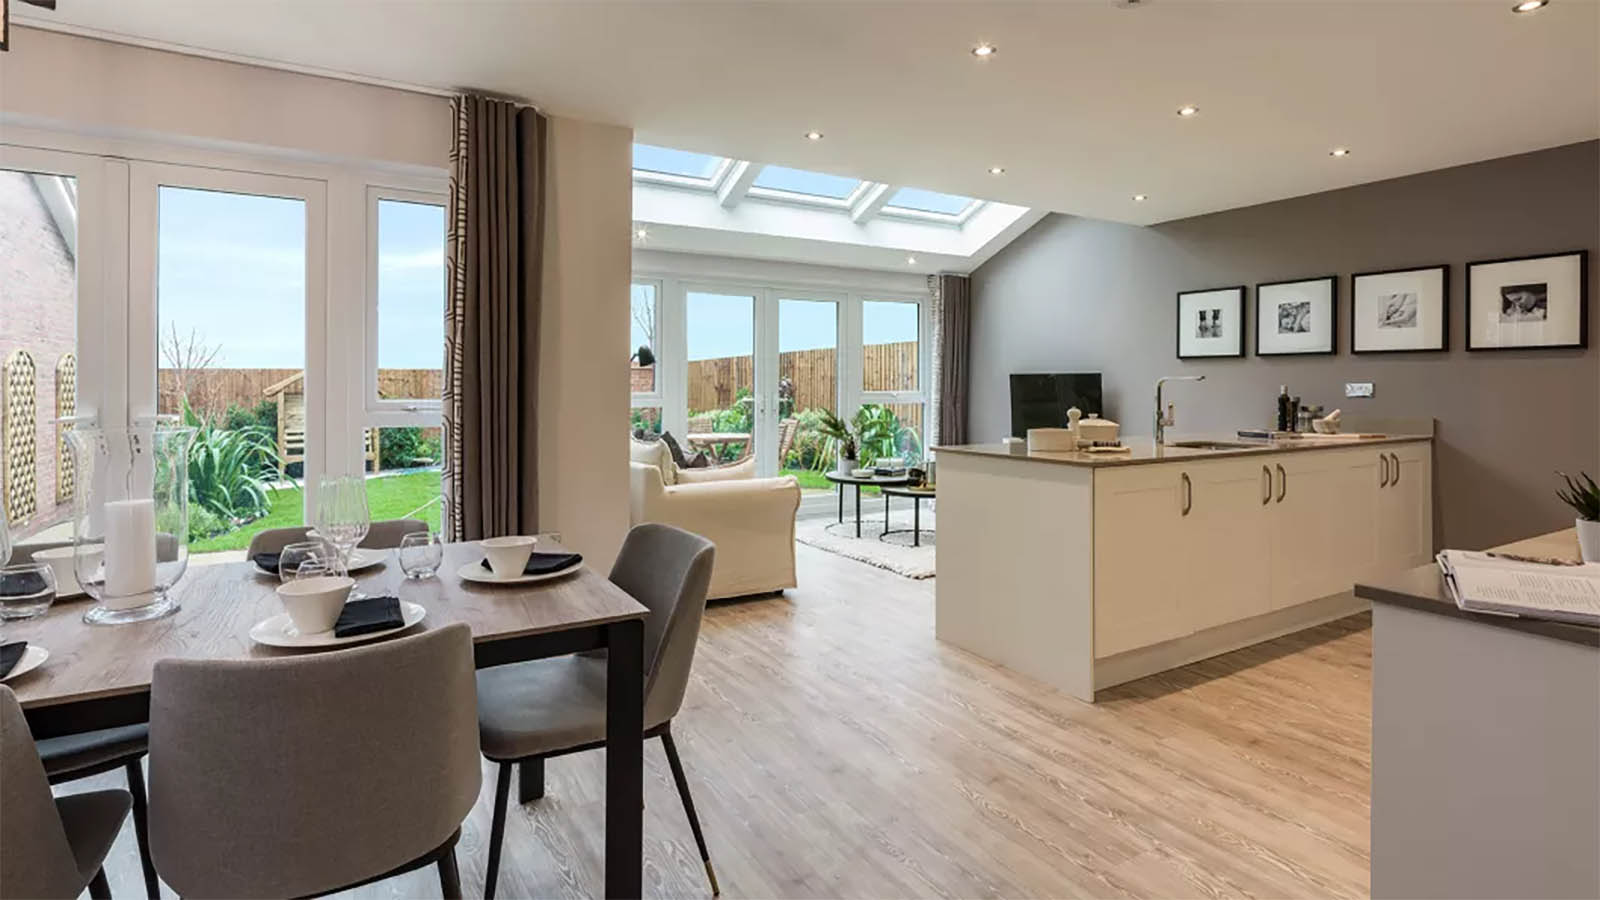 Interior at Coppice Hill, a development from Countryside Partnerships